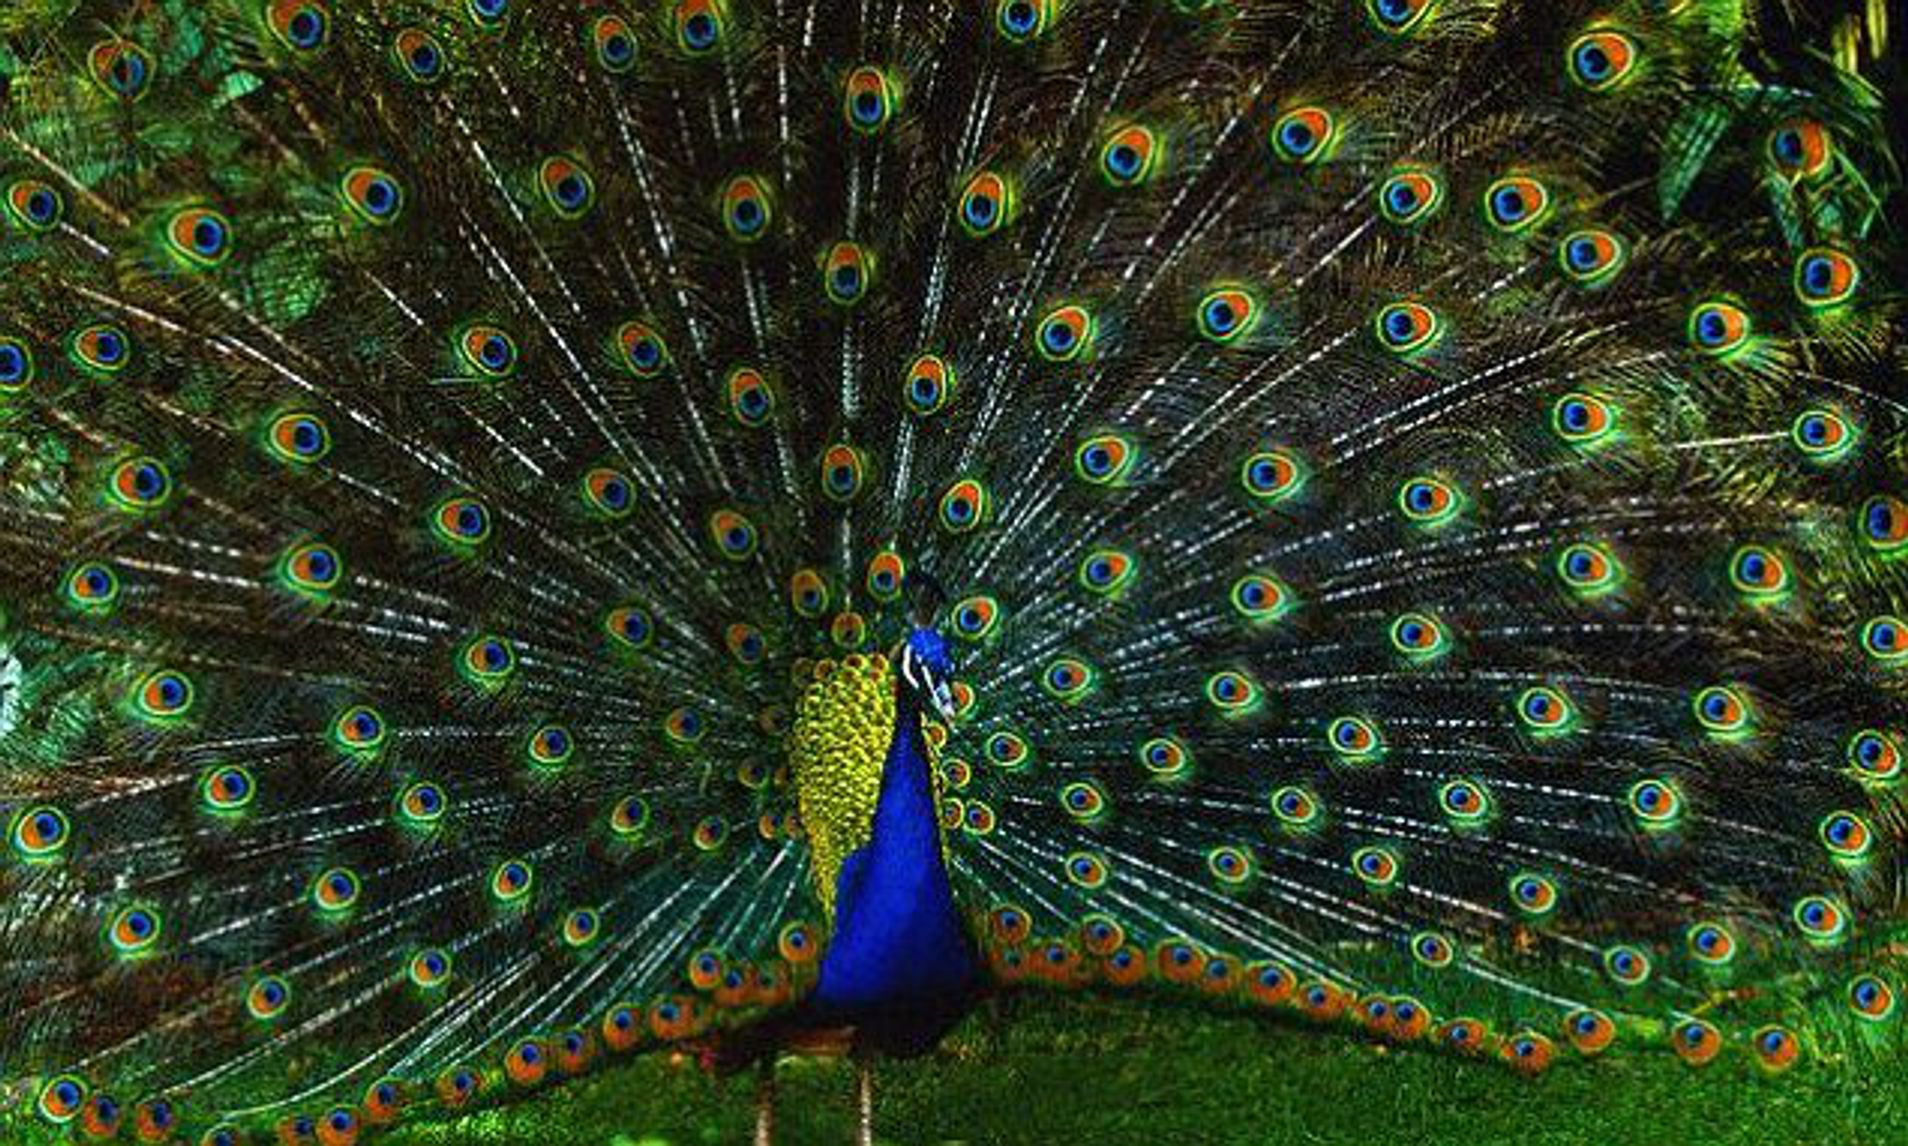 What Does It Mean When A Peacock Vibrates Its Feathers?